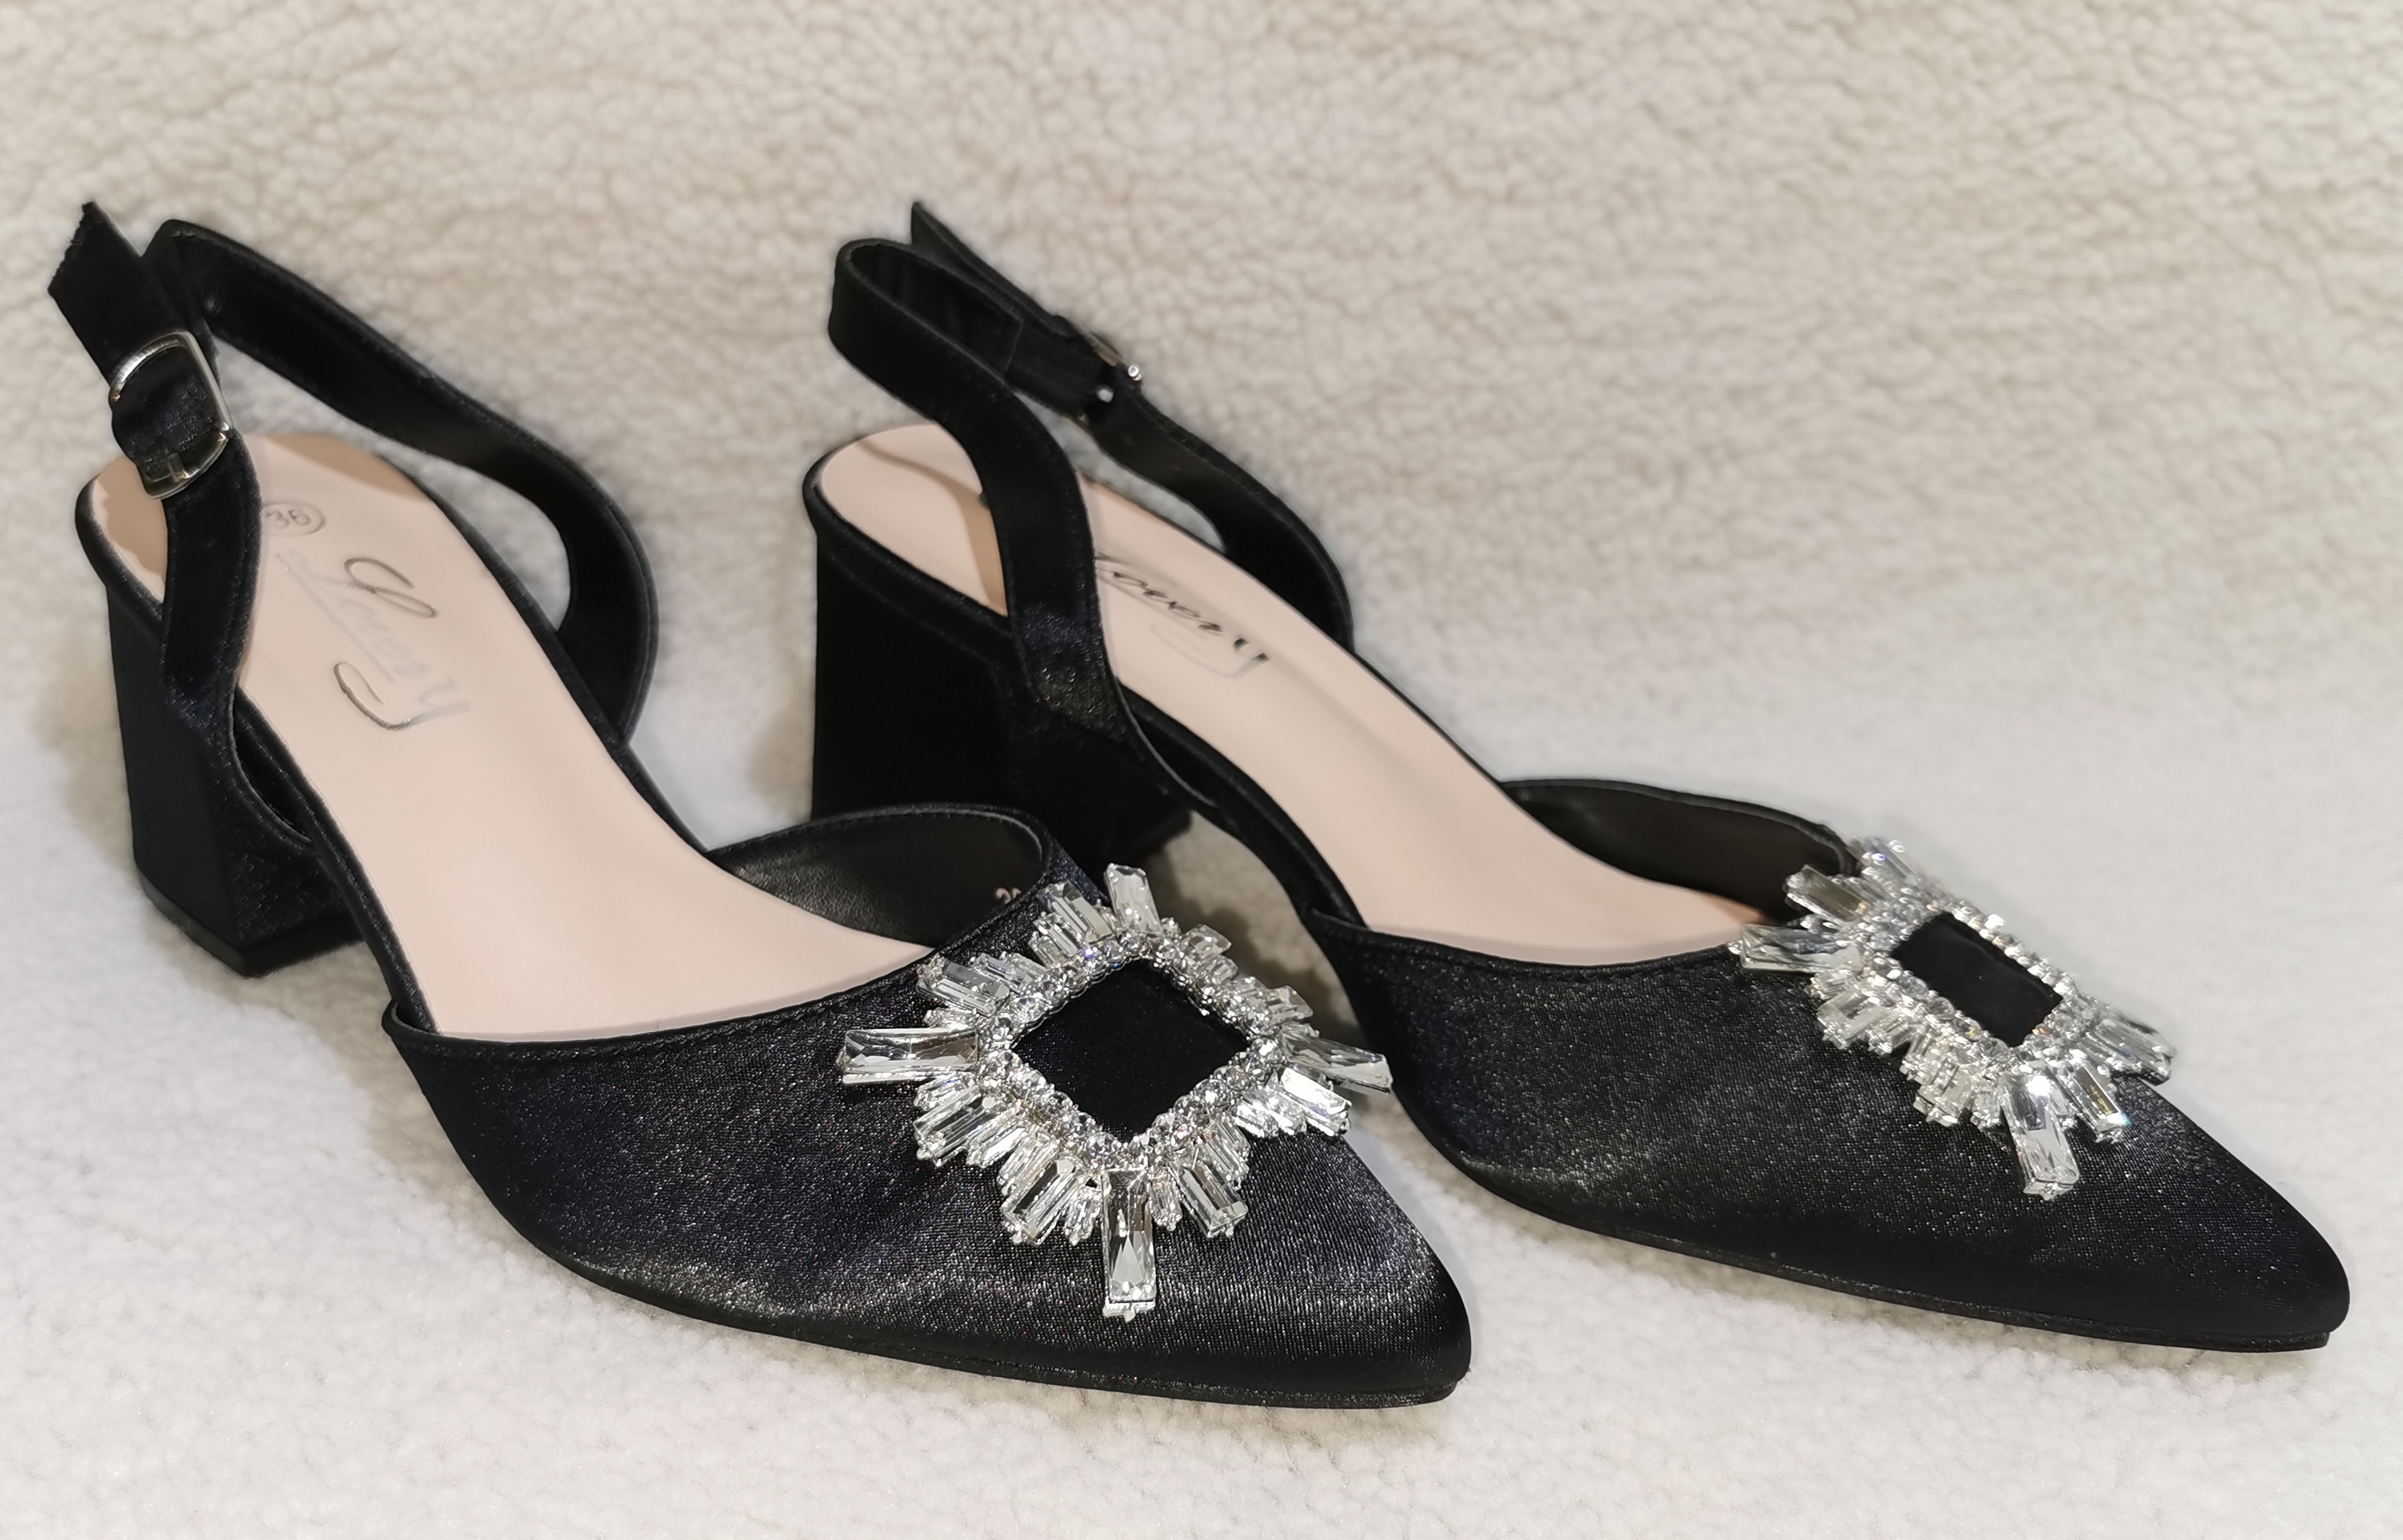 SHOES LOVELY 22/22 MONOC. SATEN+SILVER BUCKLE